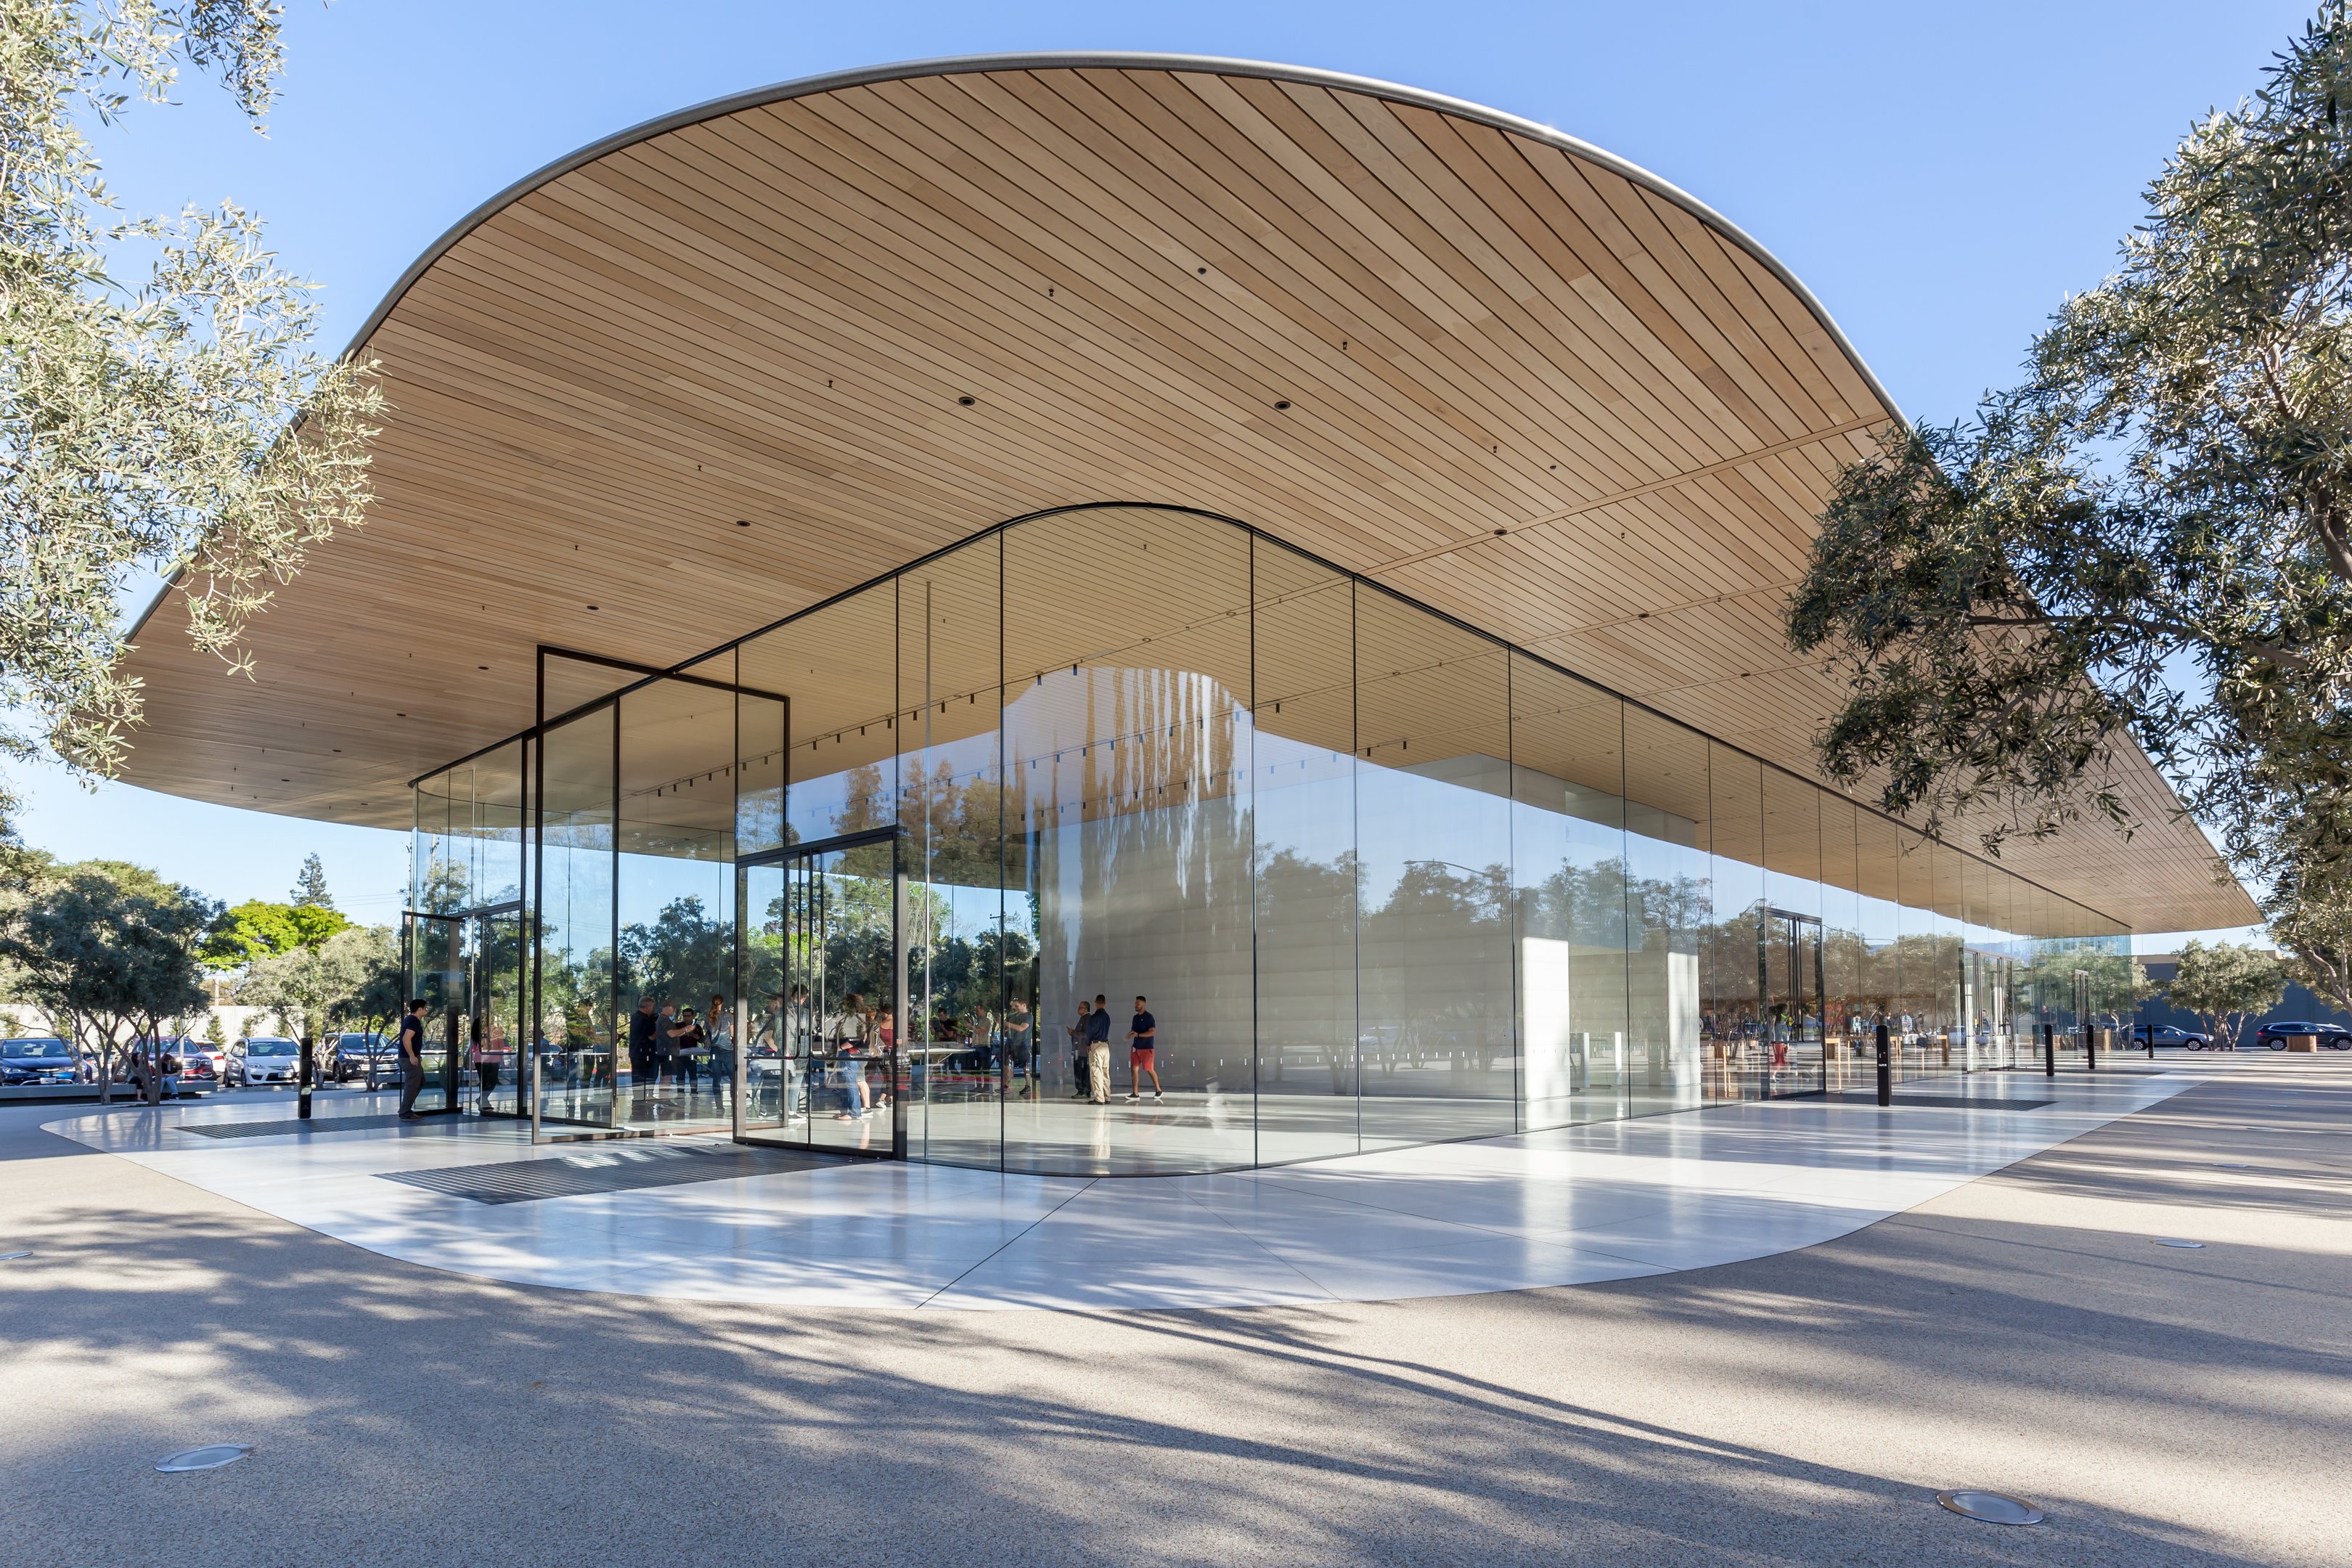 Cupertino, California, USA - March 28, 2018:  Exterior view of Apple Park Visitor Center in Silicon Valley, California. Apple Inc. is an American multinational technology company.